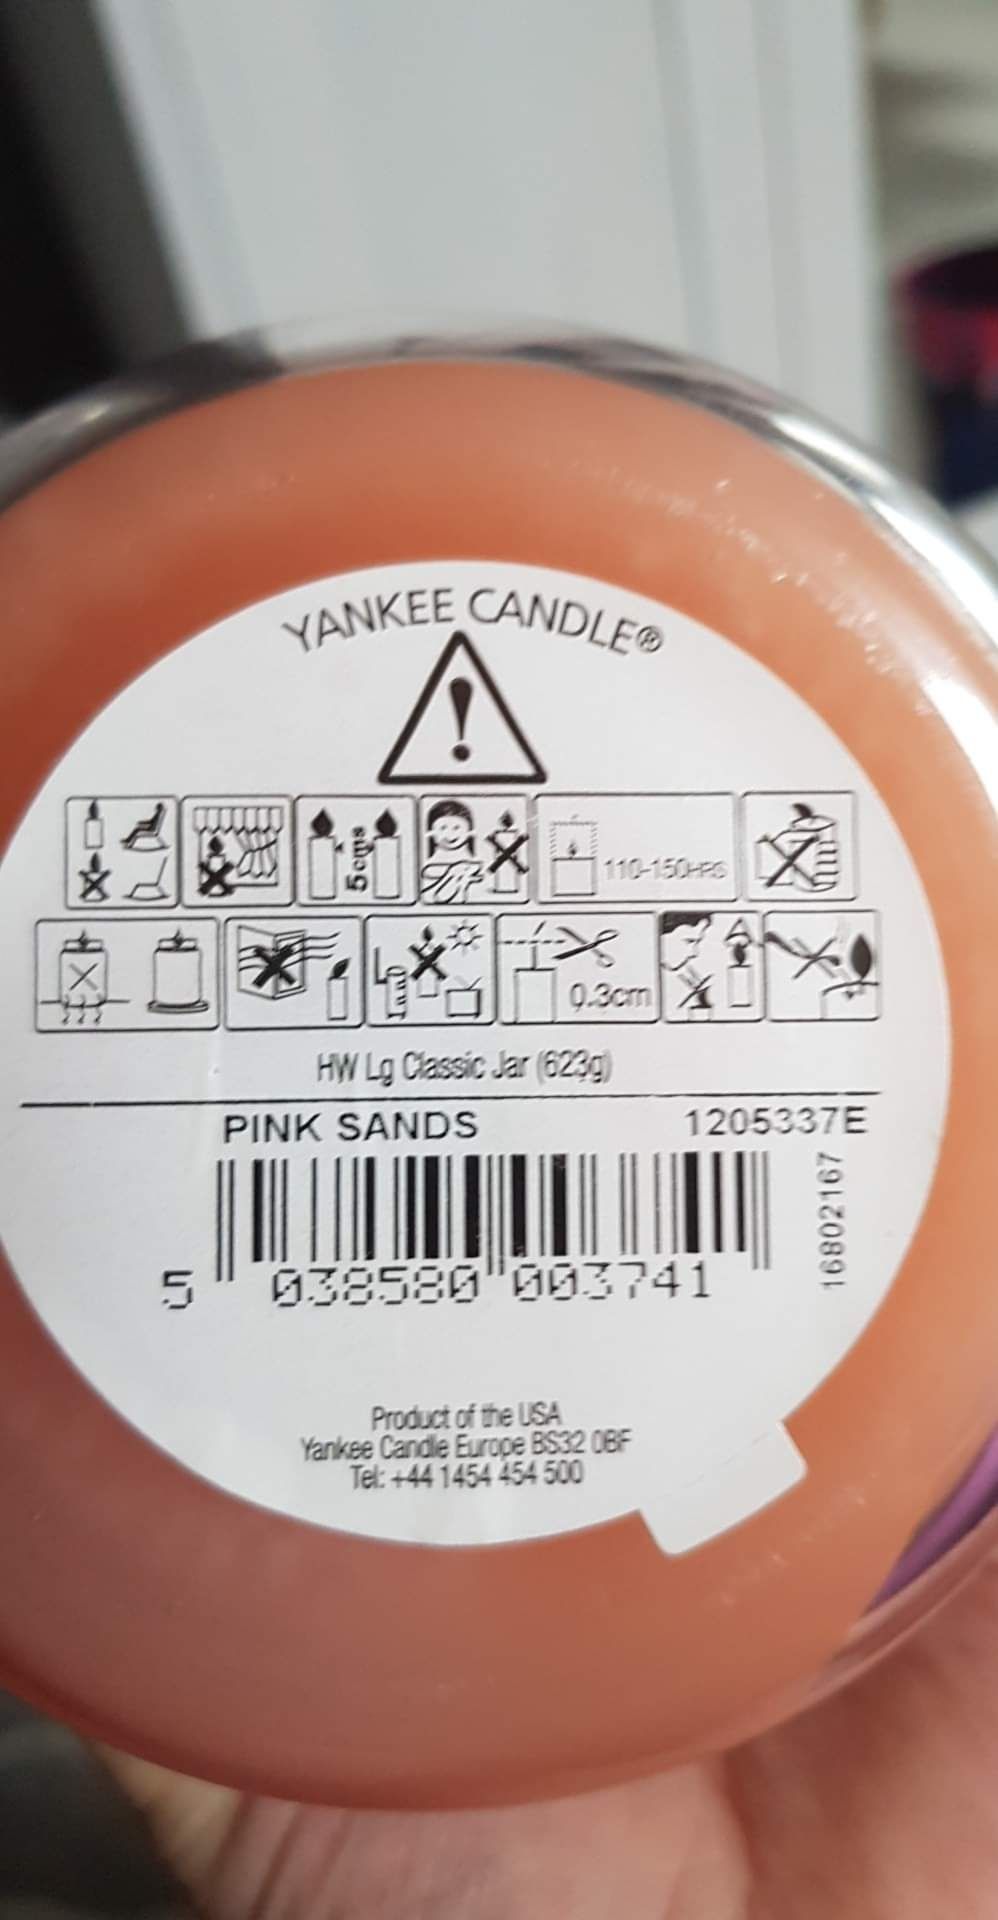 Pink Sands Yankee Candle